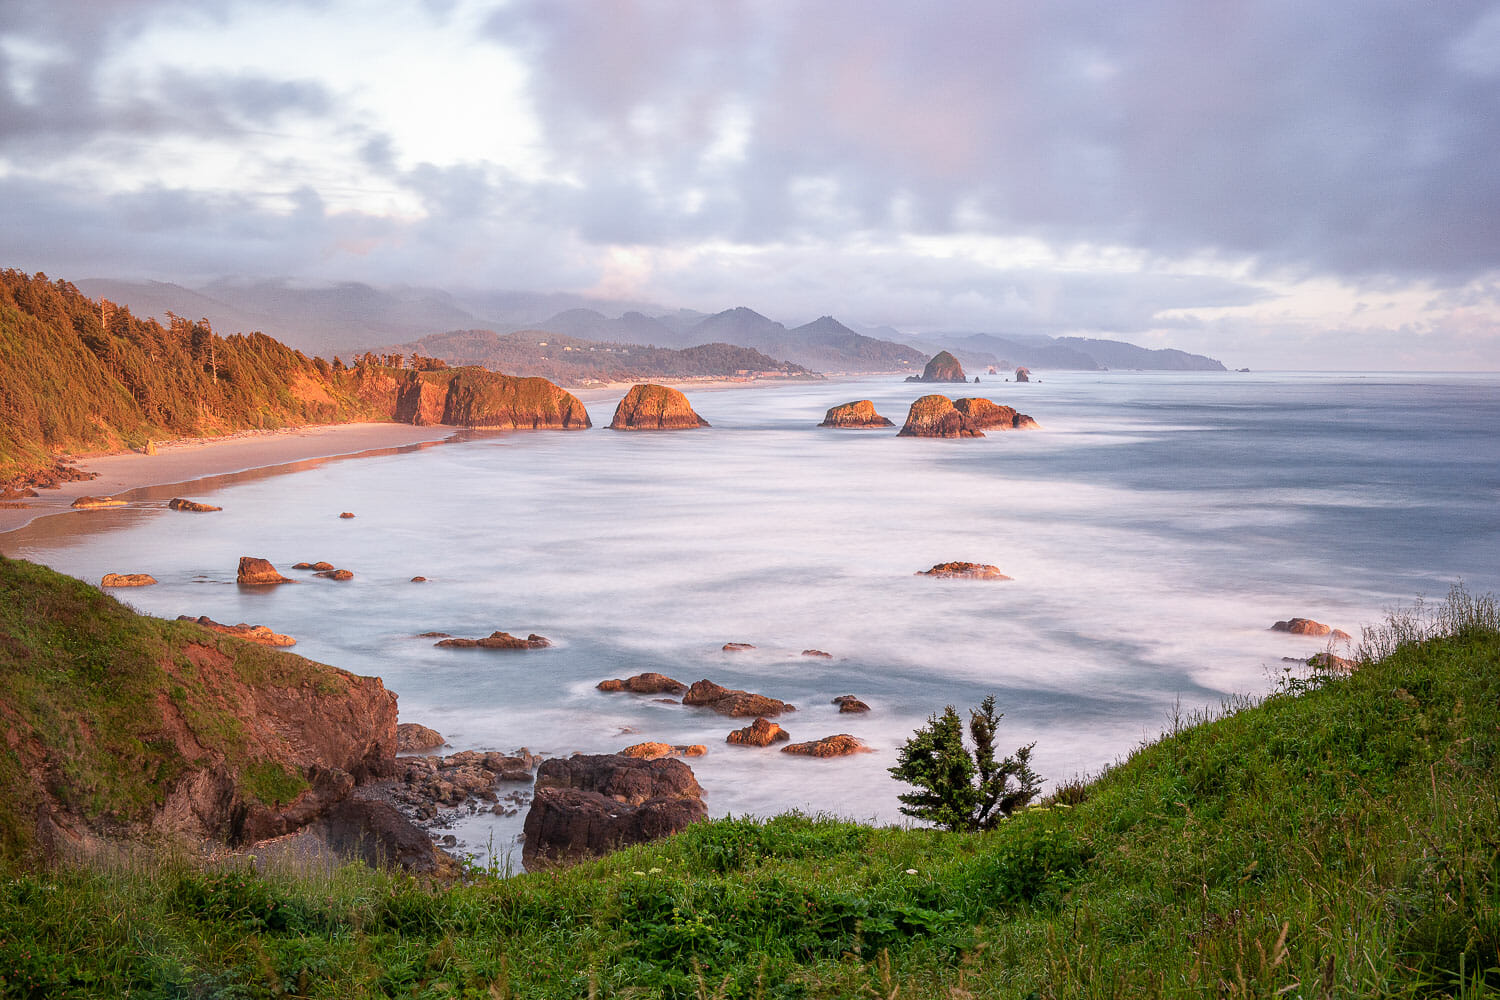 The beach at ecola state park on the oregon coast during an autumn sunset